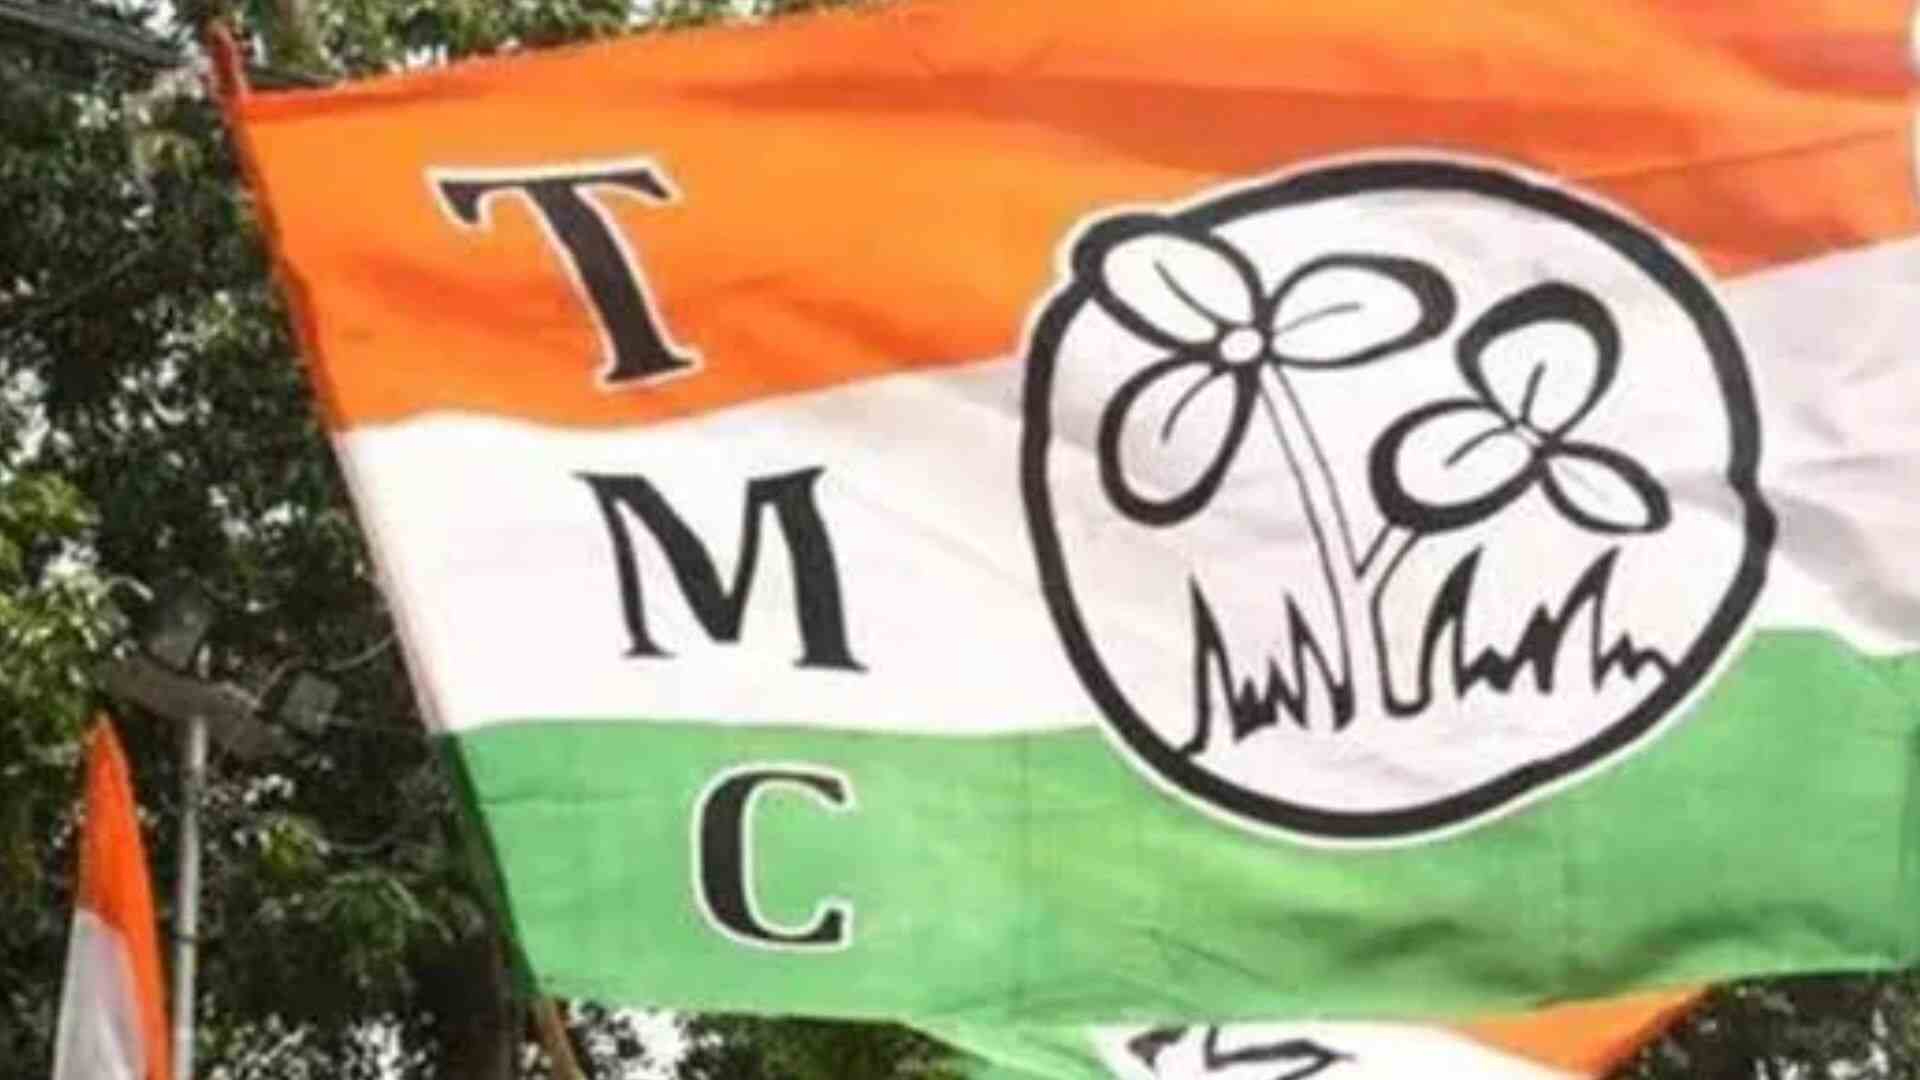 BJP releases another video of TMC goons flogging a man in Bengal